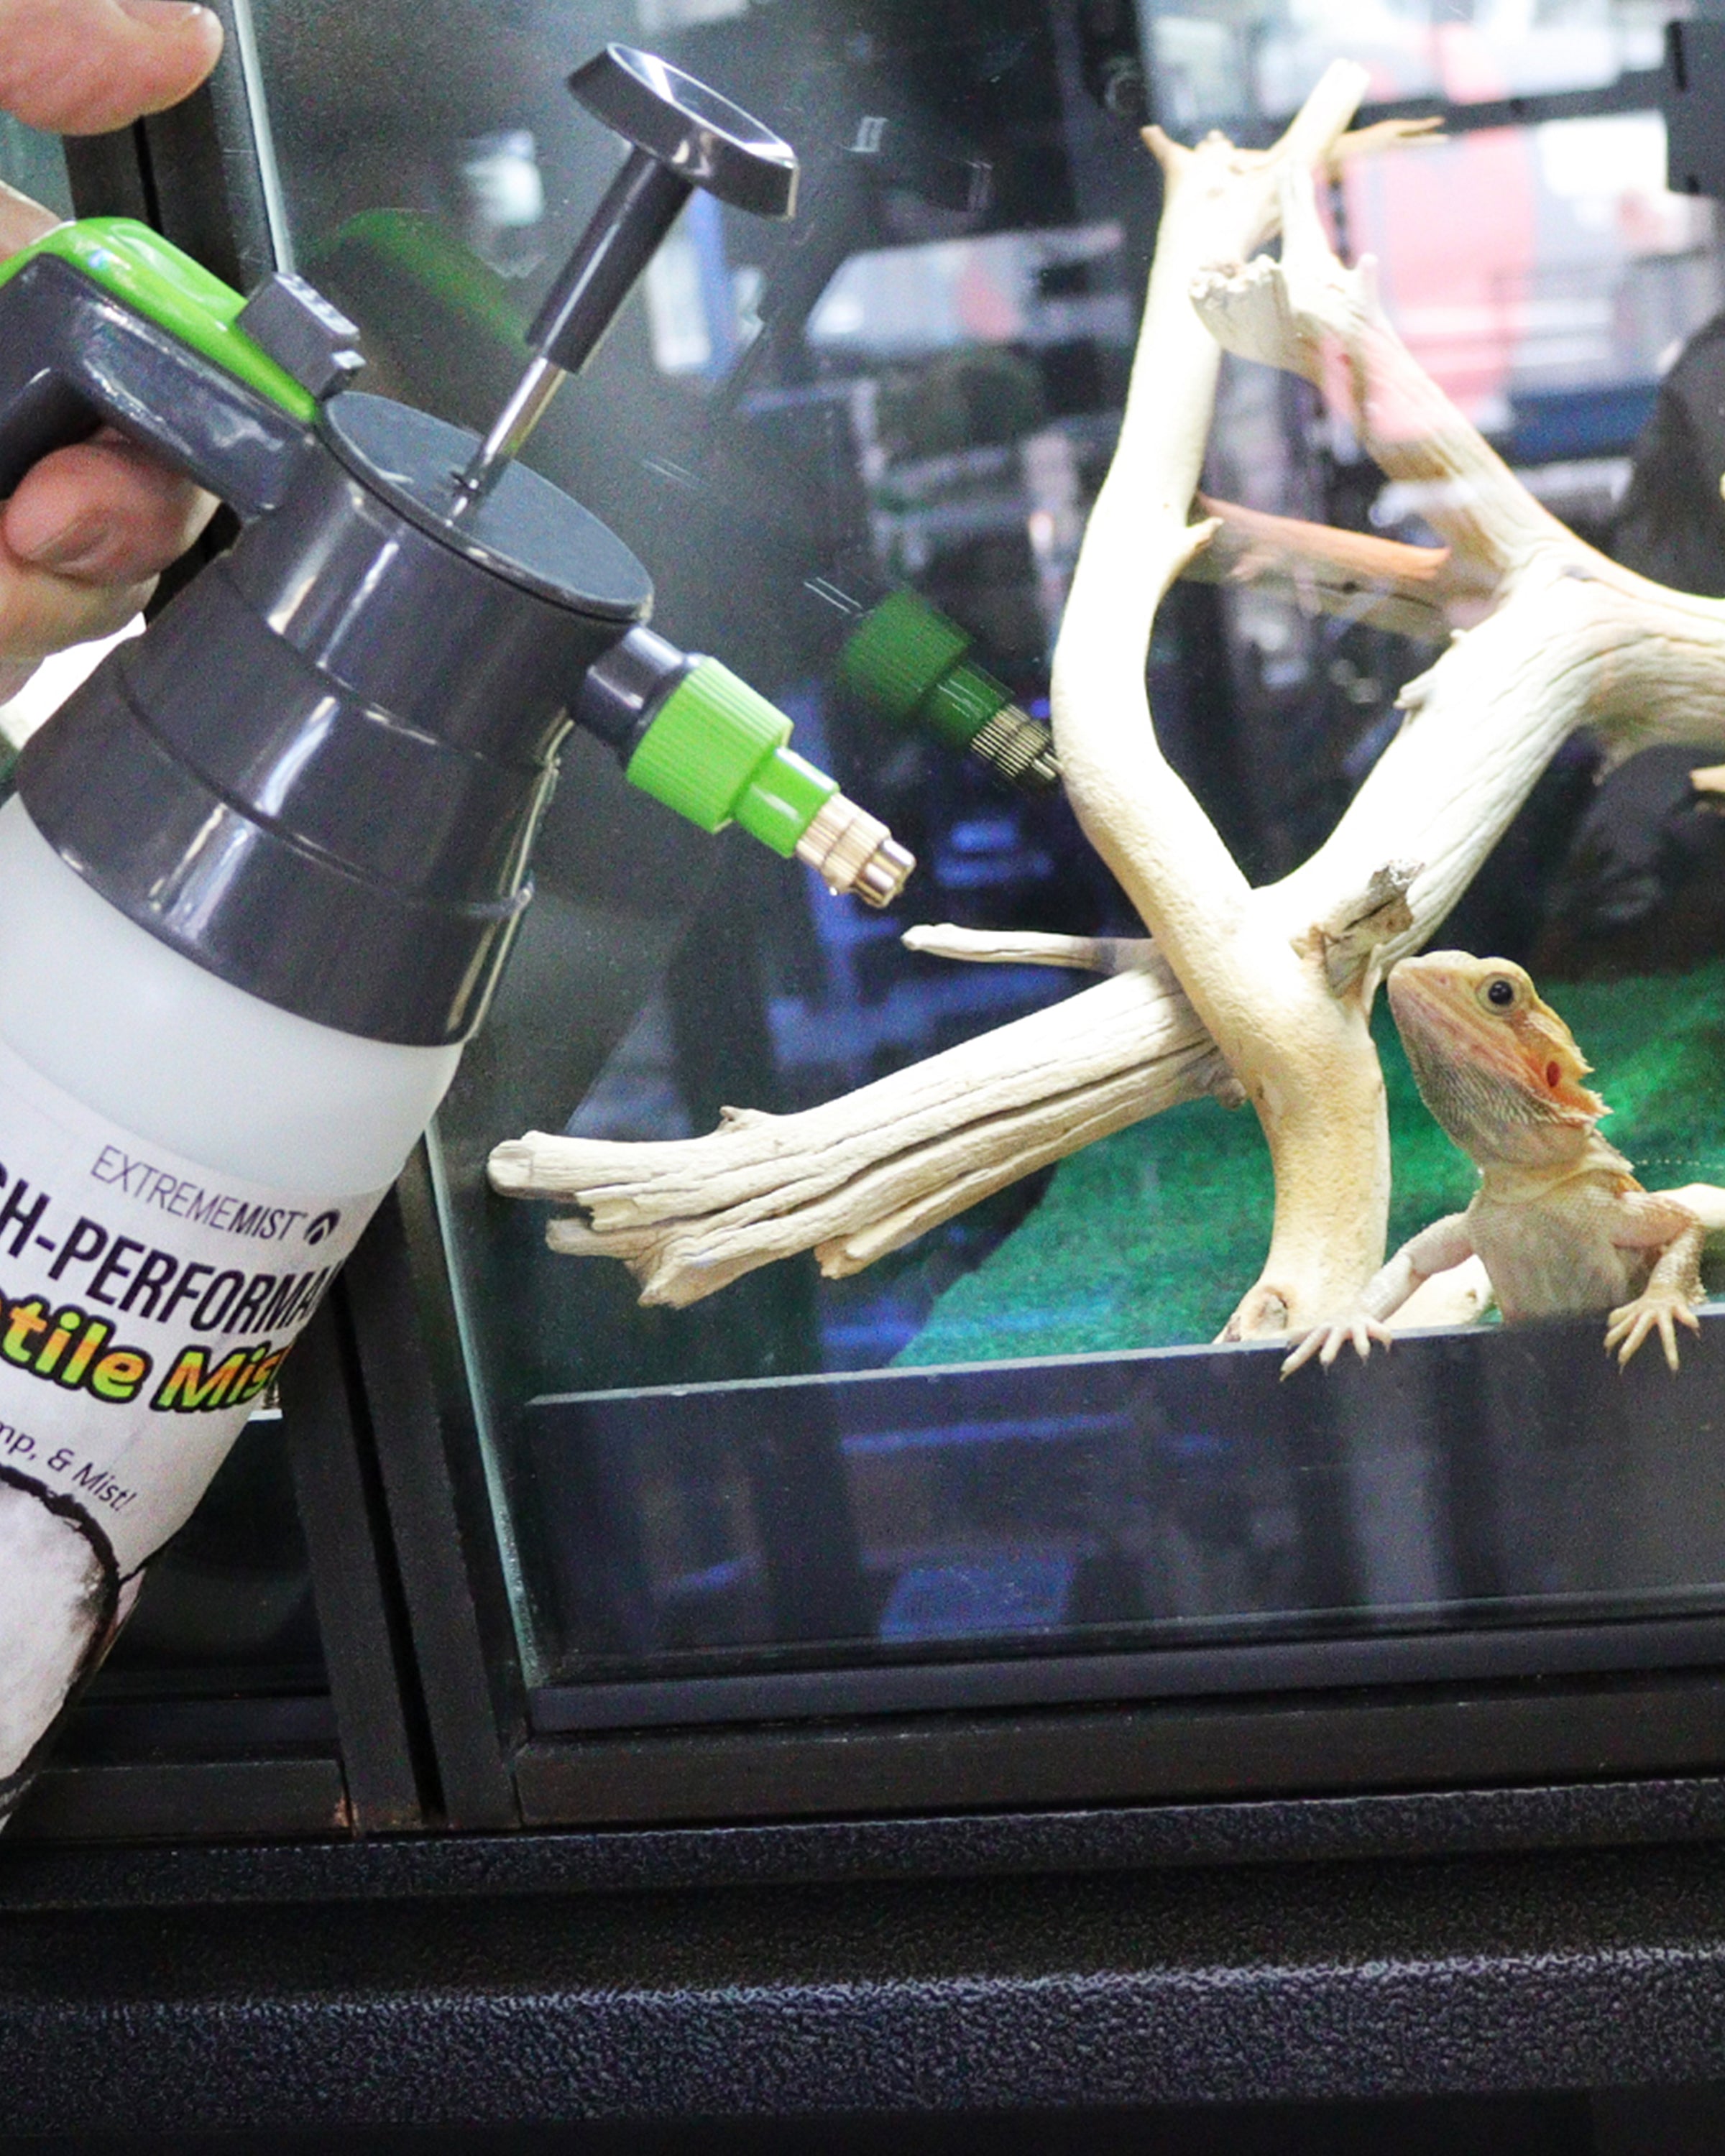 reptile mister pump-up sprayer pointed at lizard in reptile enclosure